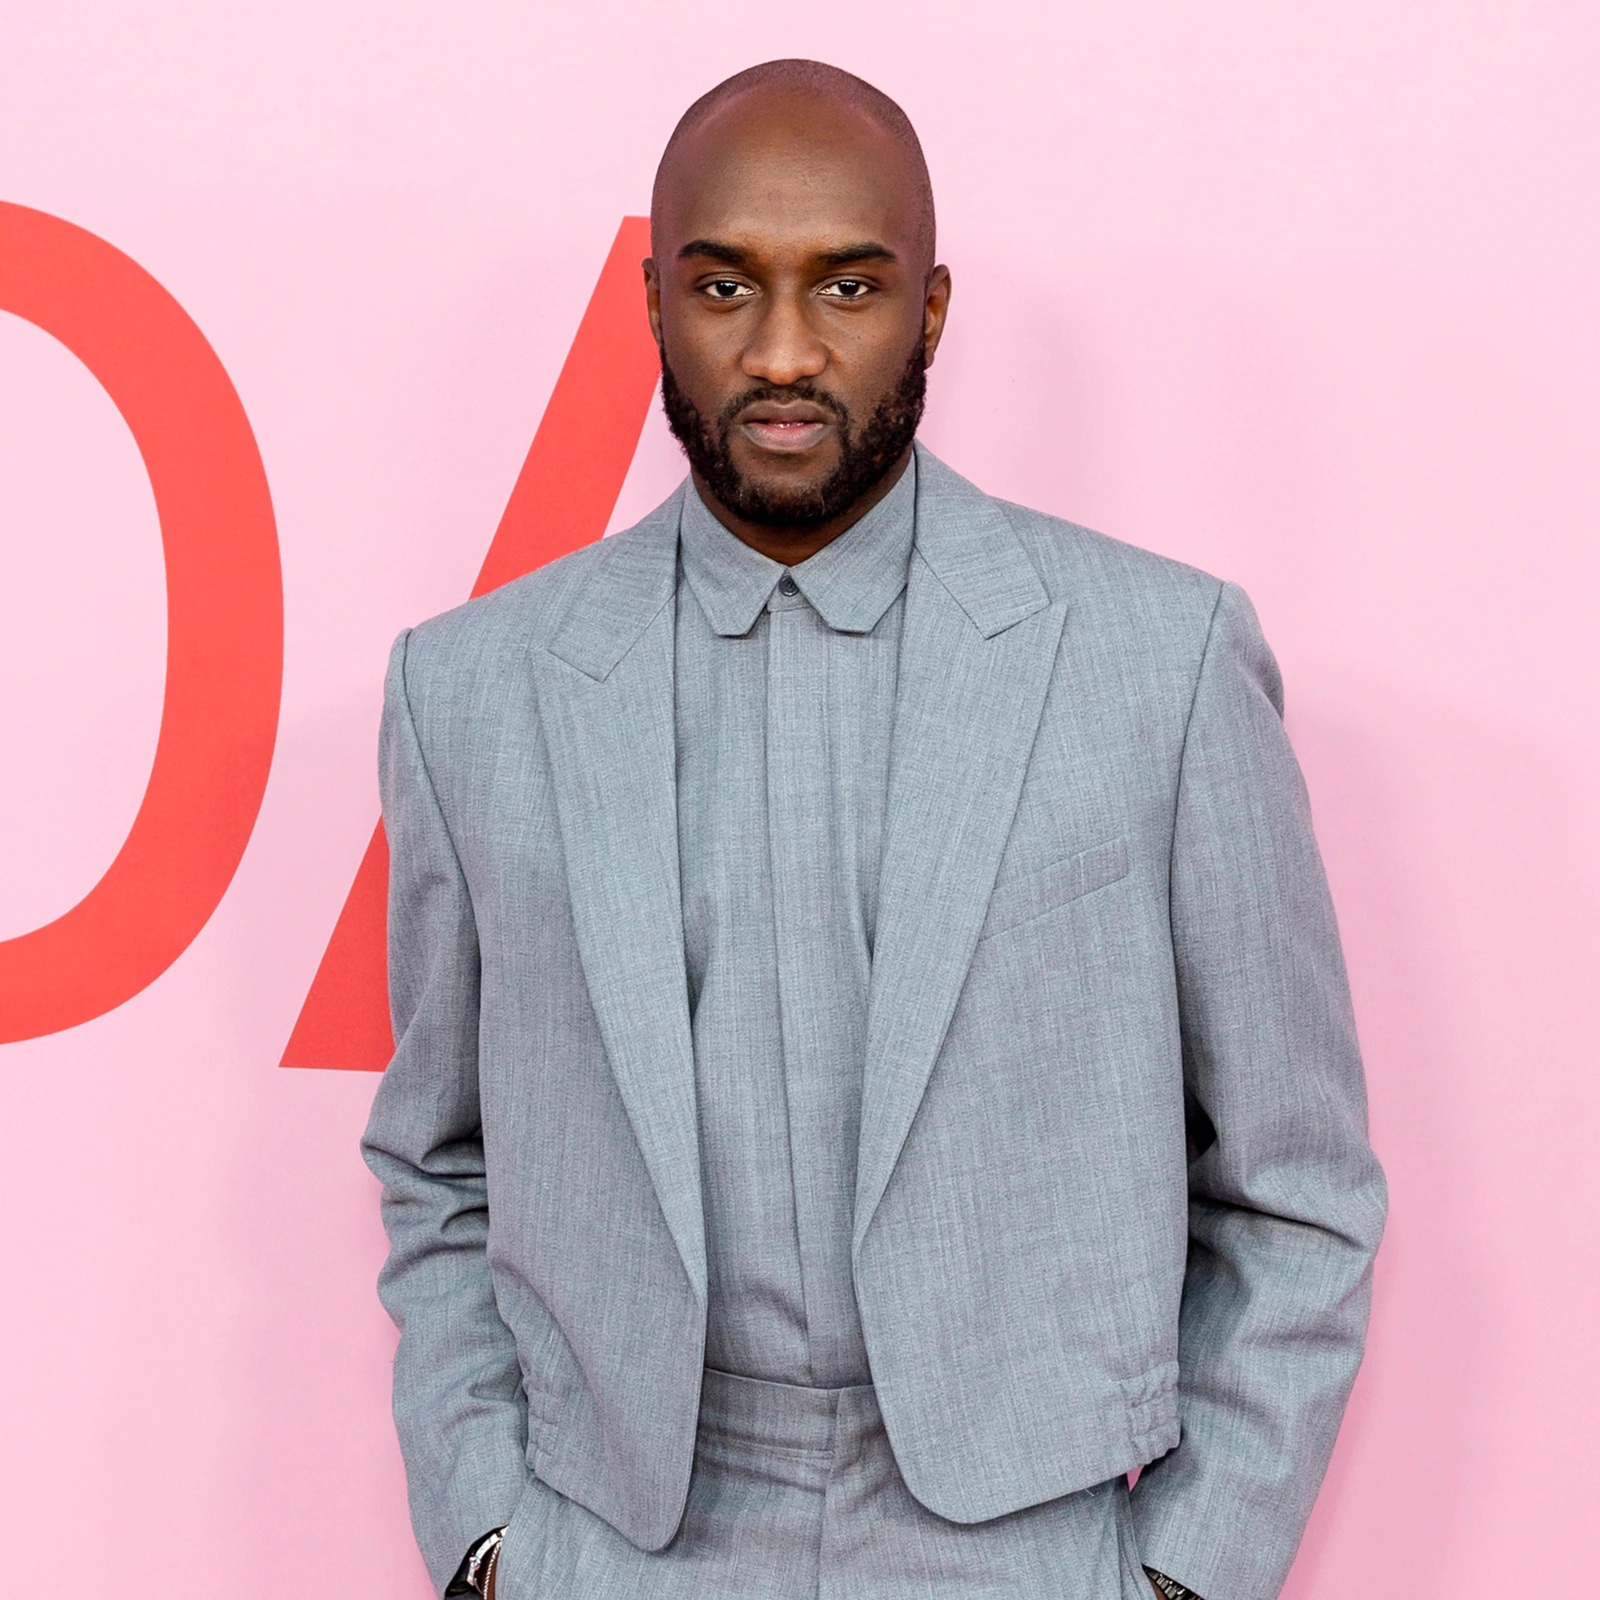 Virgil Abloh Bio, Death, Married, Relationship, Wife, Net Worth, Age